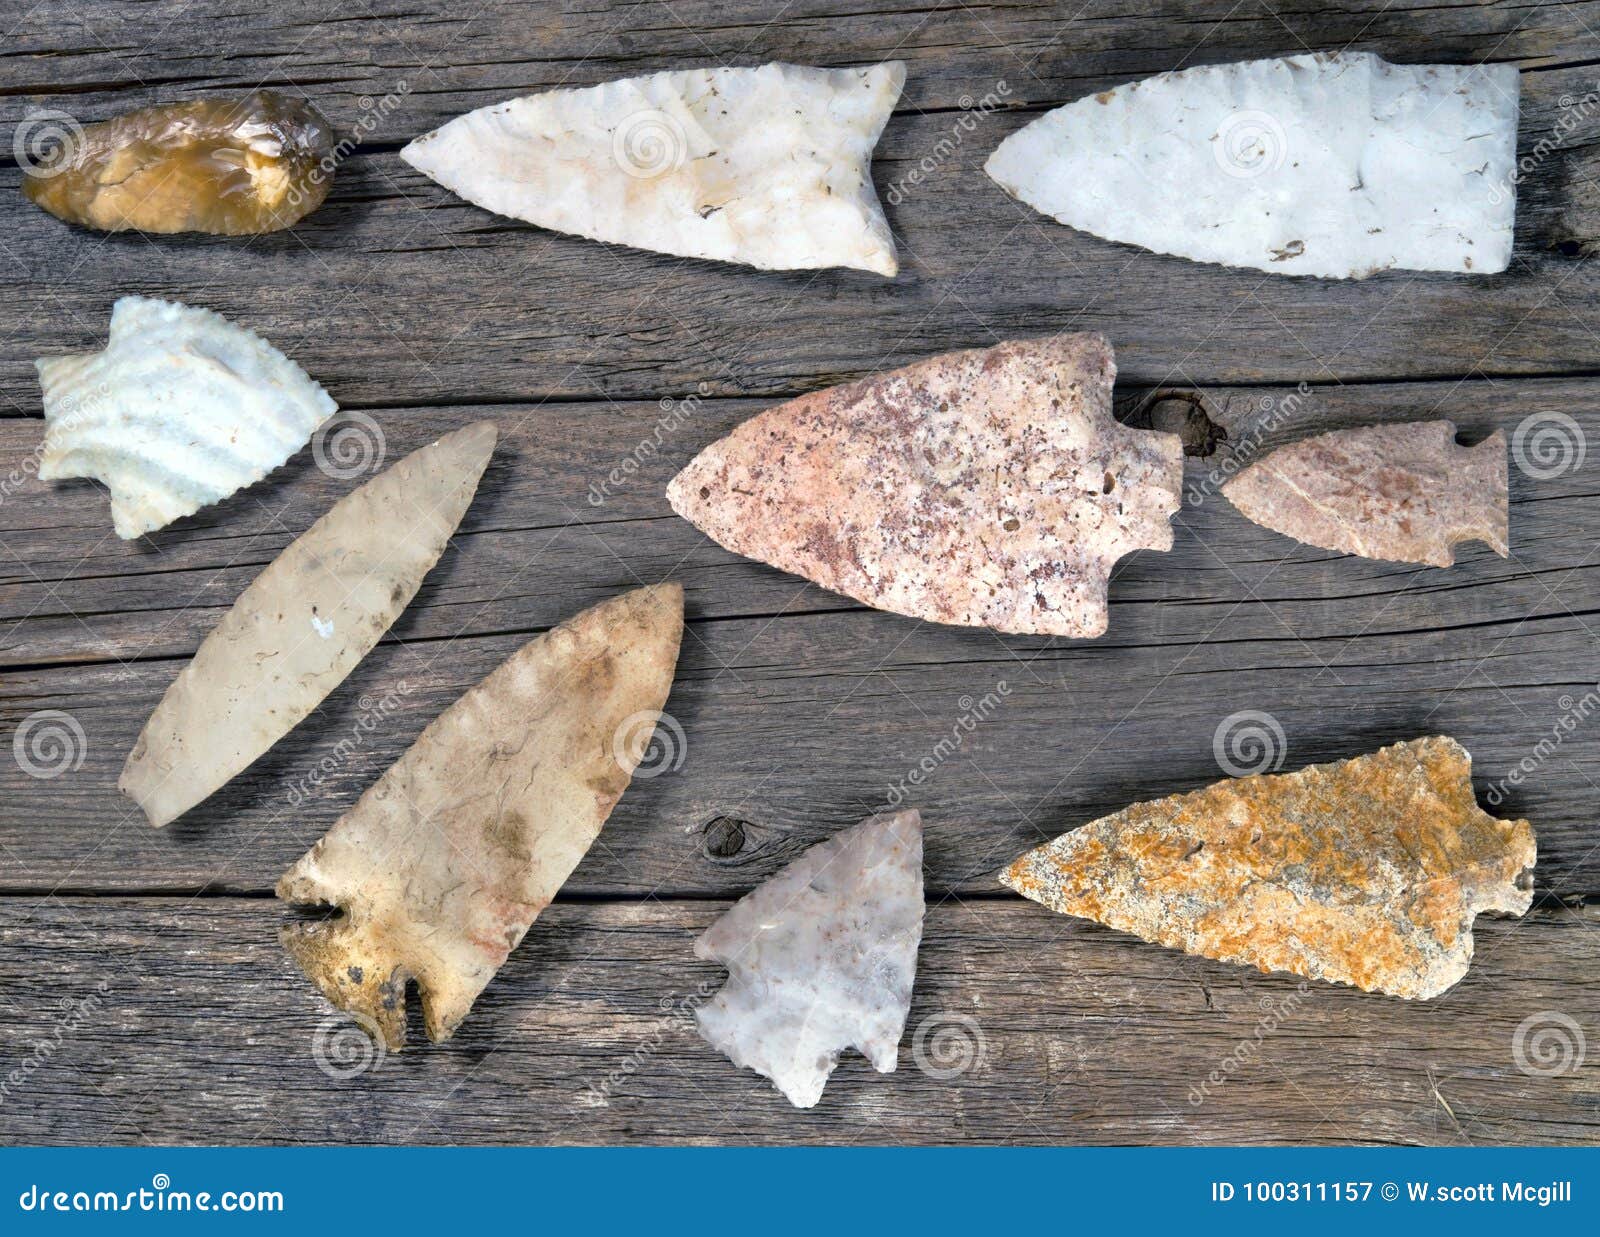 real american indian arrowheads.